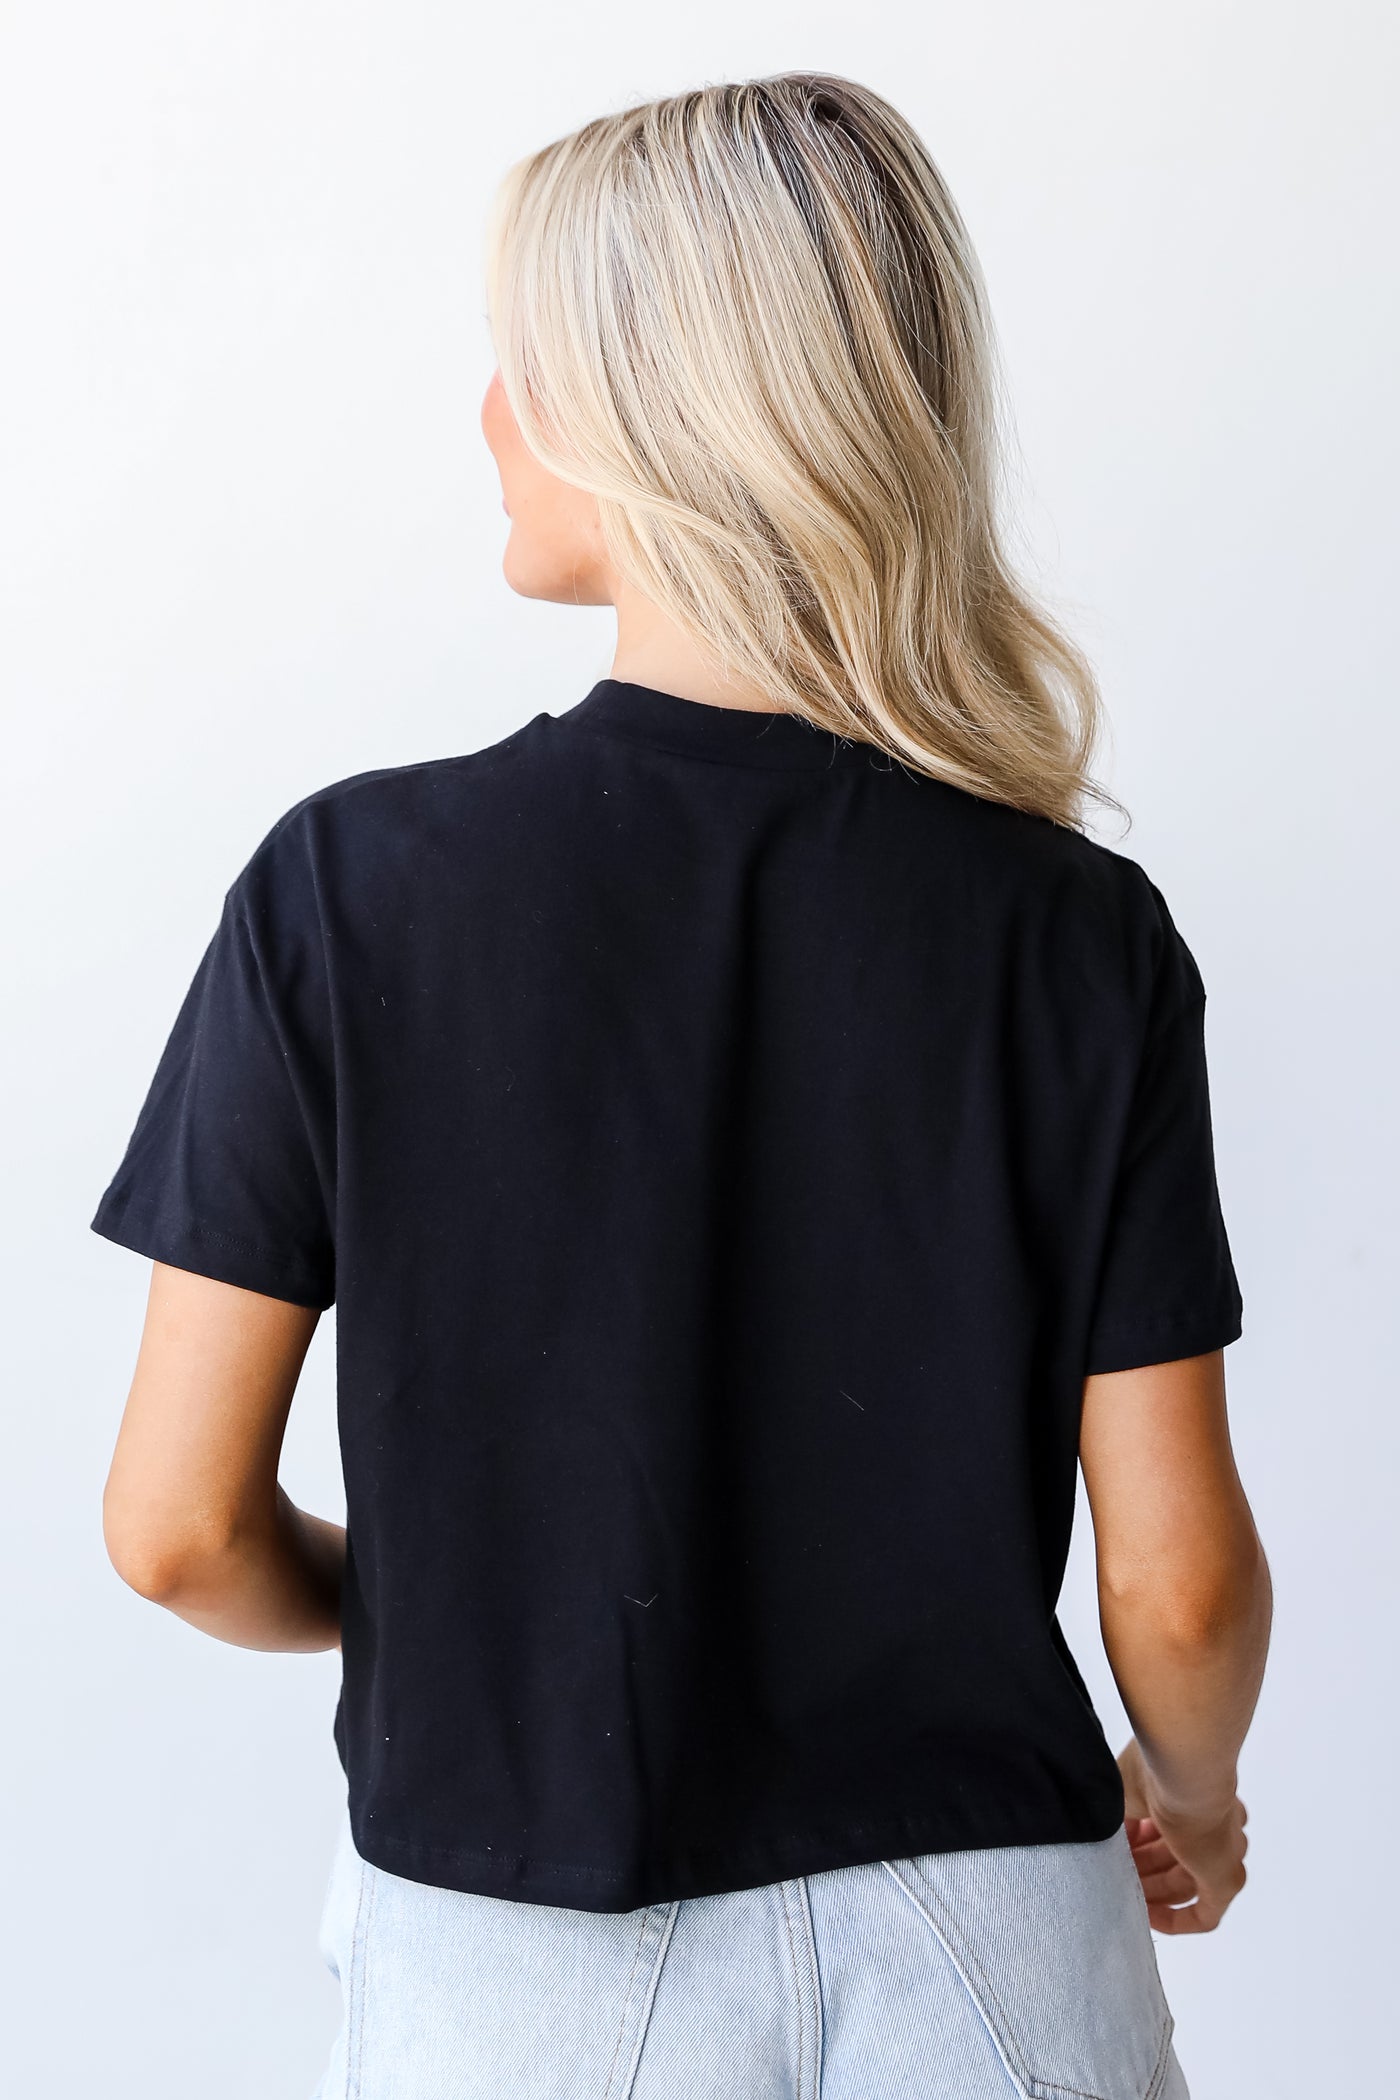 Black Nashville Tennessee Cropped Tee back view